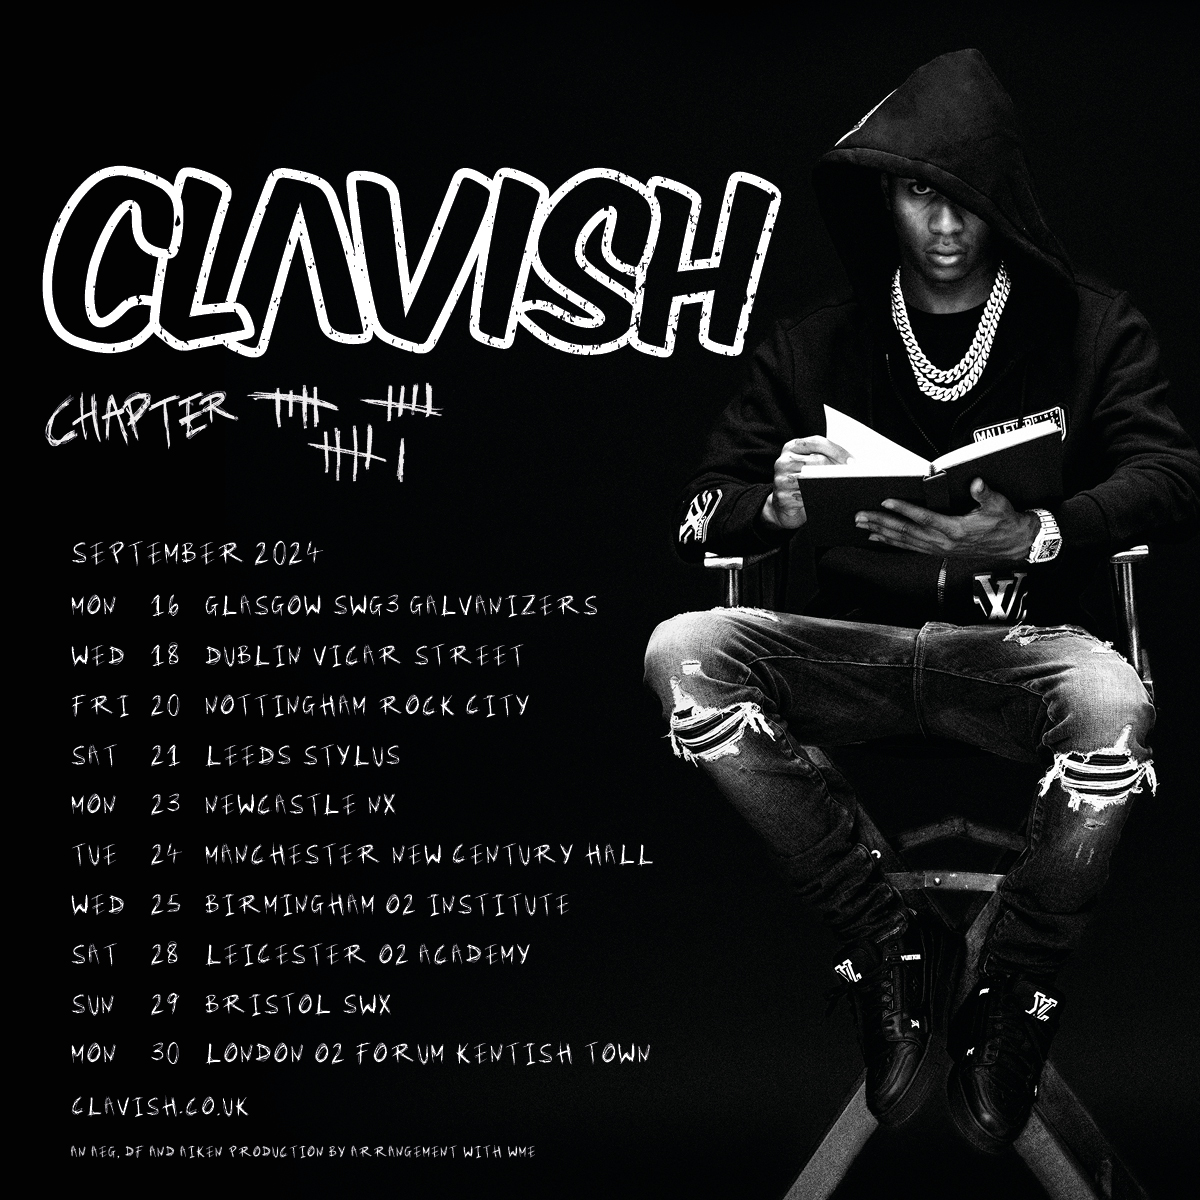 With his new mixtape 'Chapter 16' due for release next week, breakthrough rapper @clavish has announced a UK and Irish tour! Tickets go on sale at 10am tomorrow - don't miss out: gigseekr.com/uk/en/concerts…